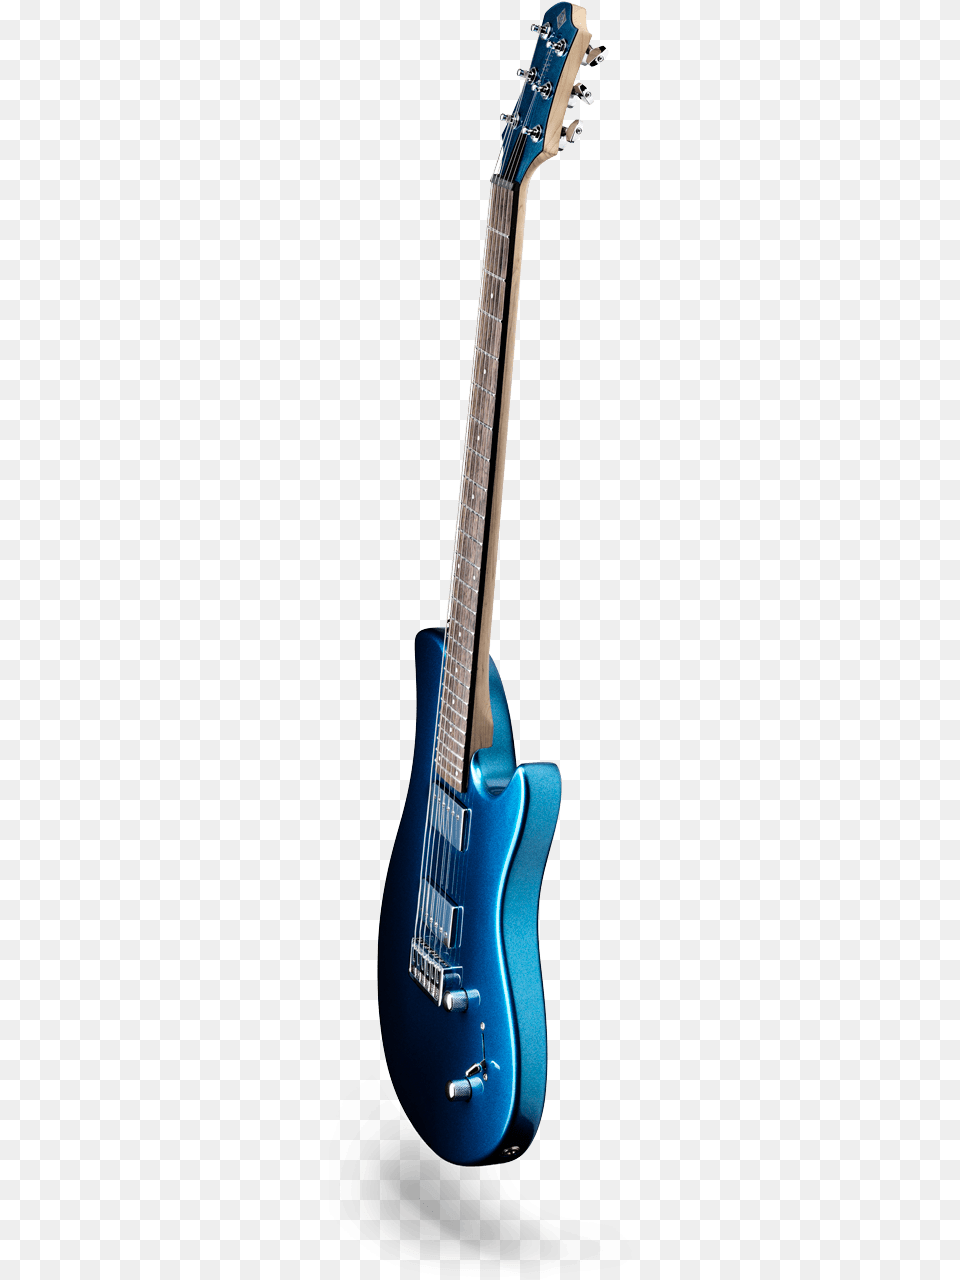 Trinity By Relish Electric Guitar, Musical Instrument, Bass Guitar, Electric Guitar Png Image